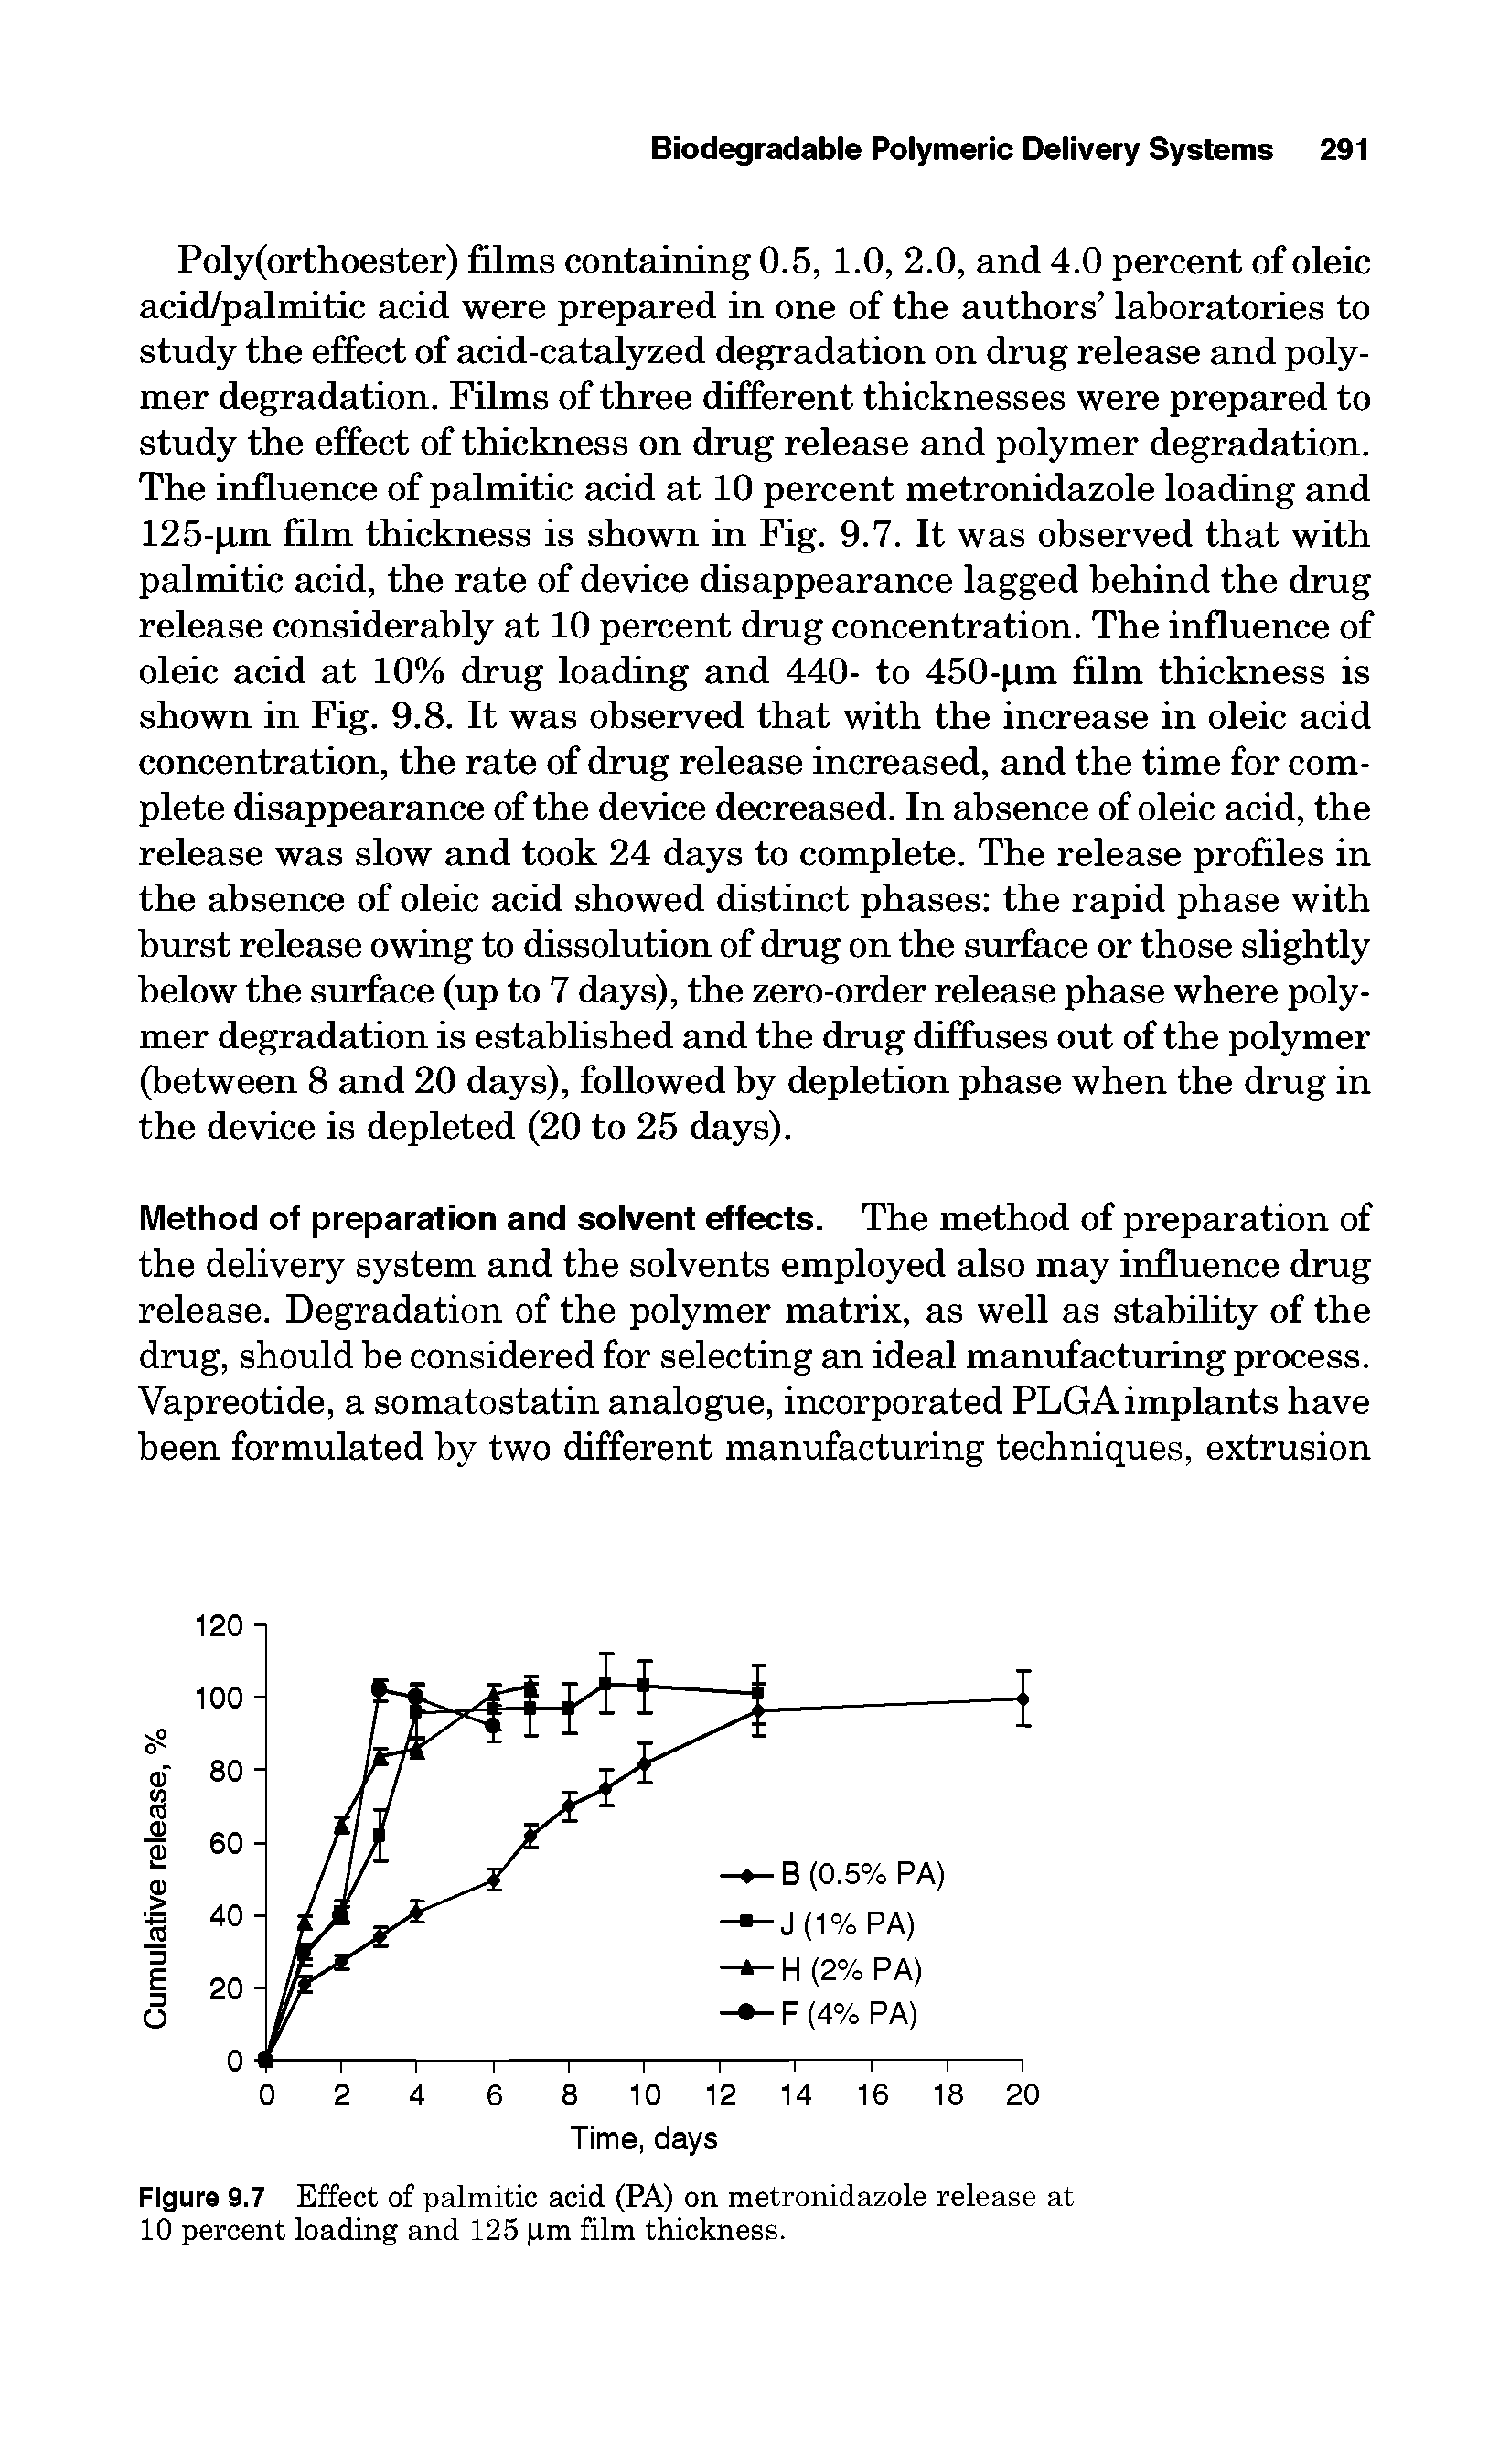 Figure 9.7 Effect of palmitic acid (PA) on metronidazole release at 10 percent loading and 125 pm film thickness.